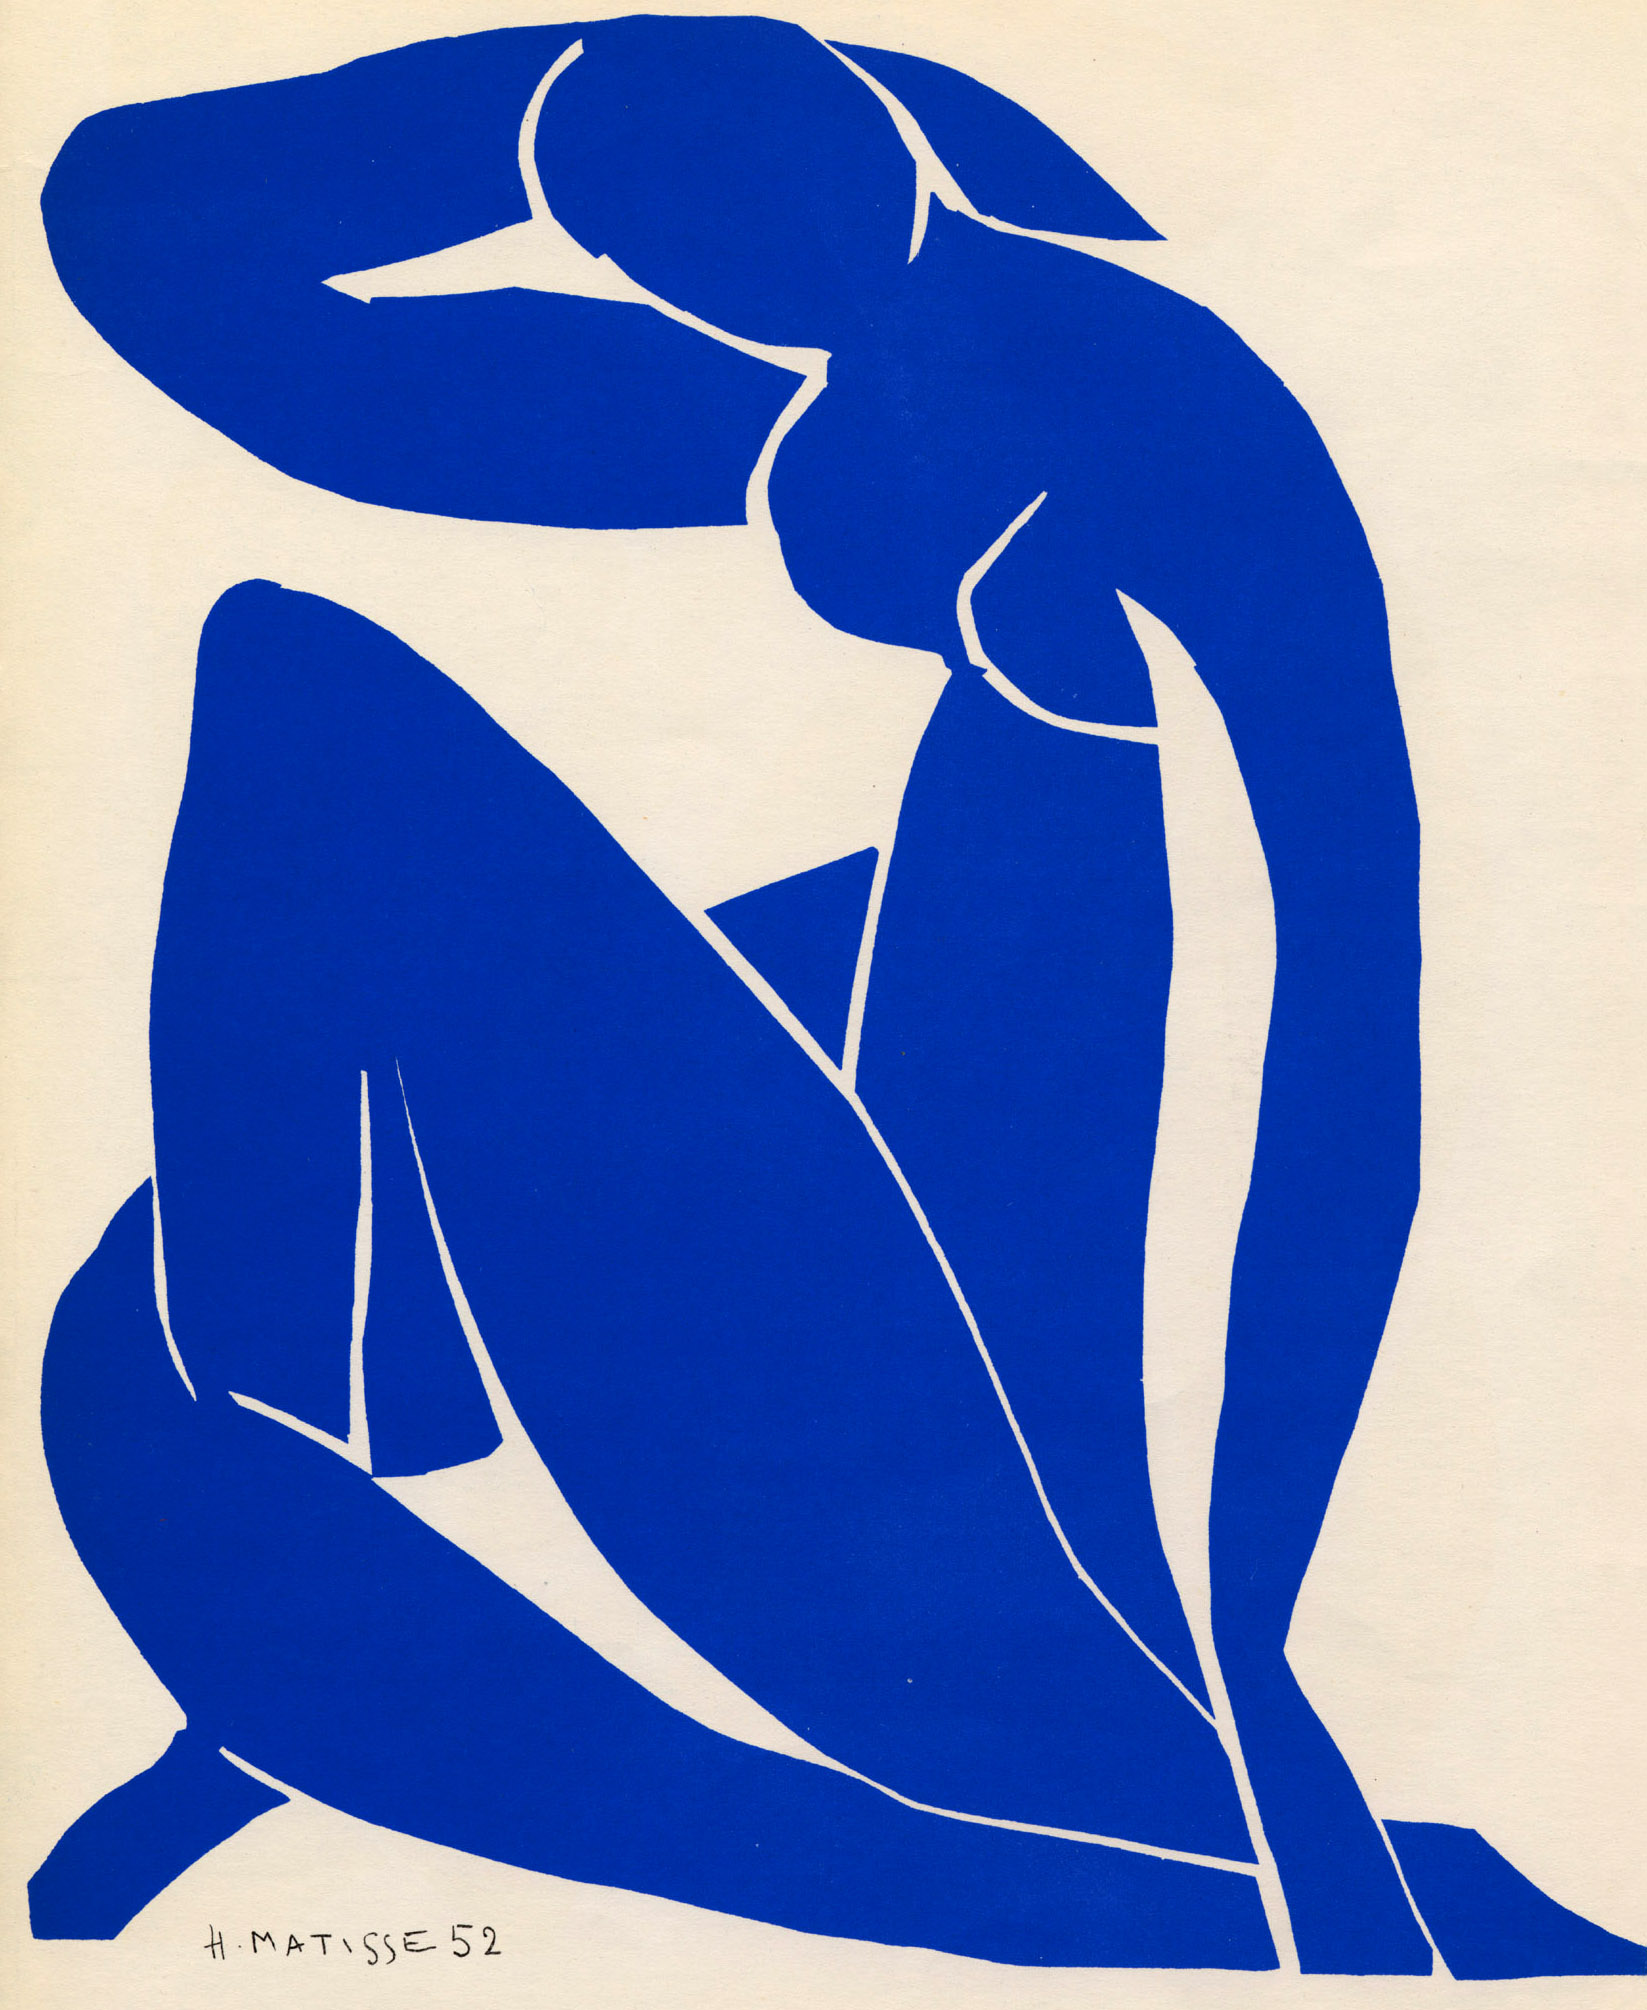 Matisse Cut-outs at Gala Gallery